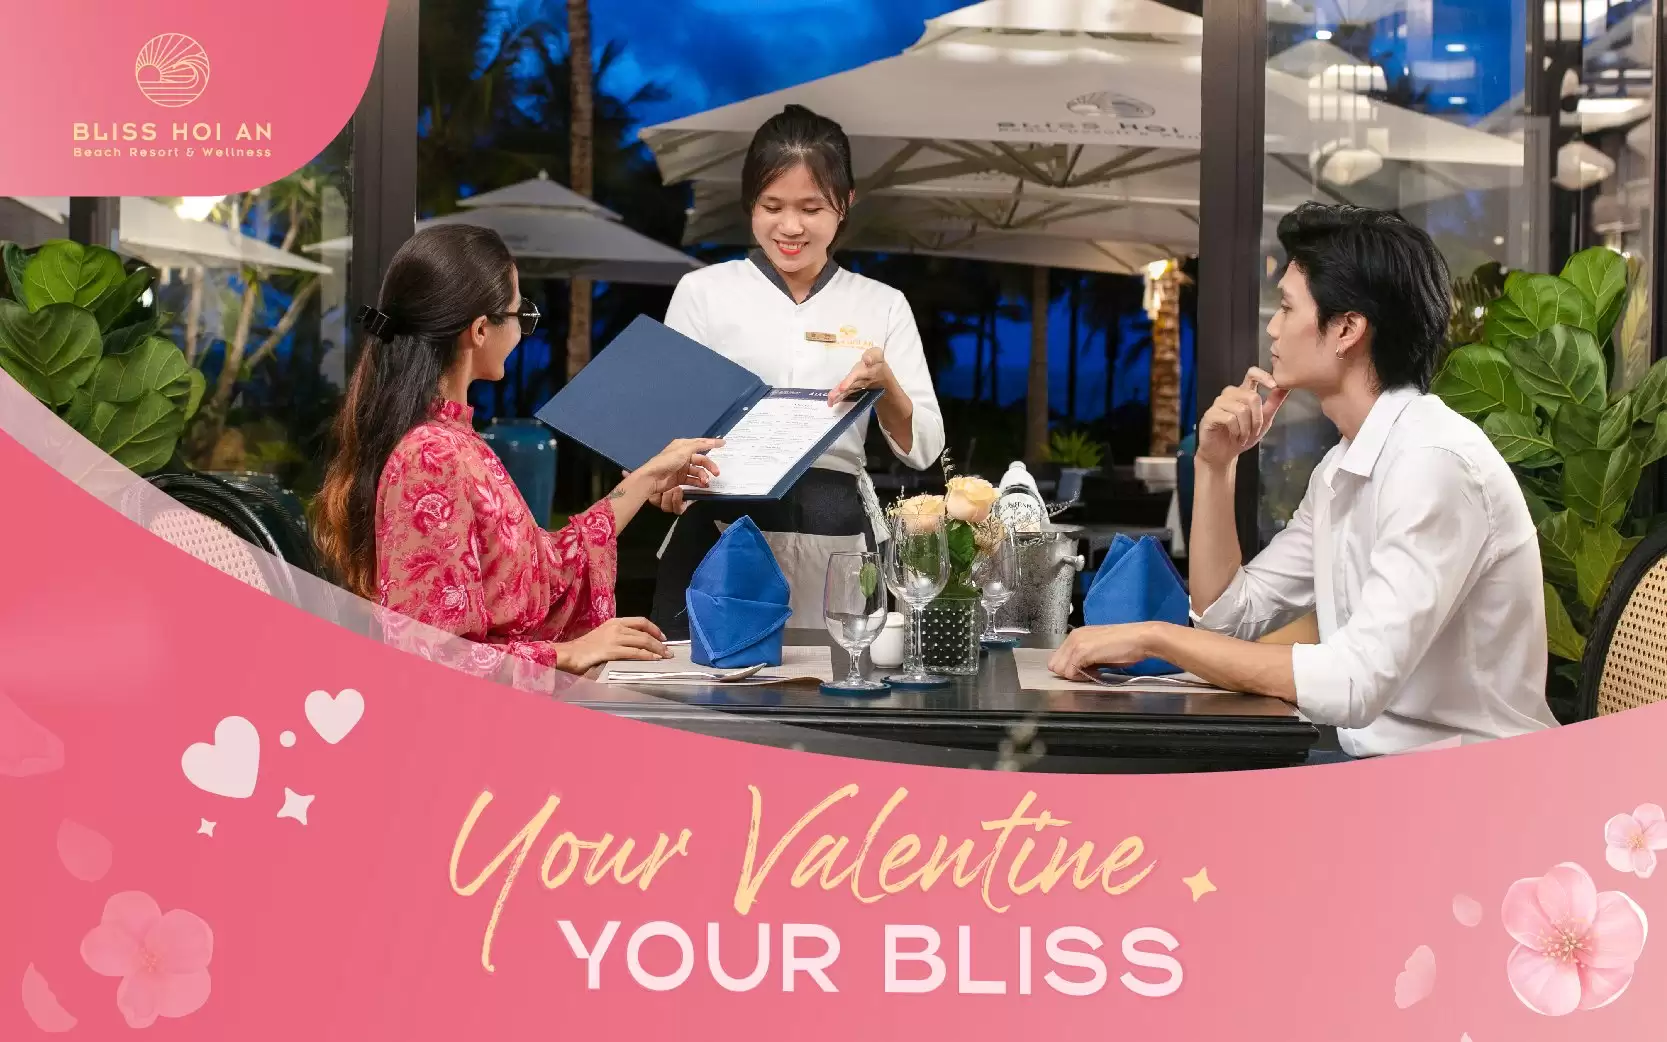 Your Valentine - Your Bliss